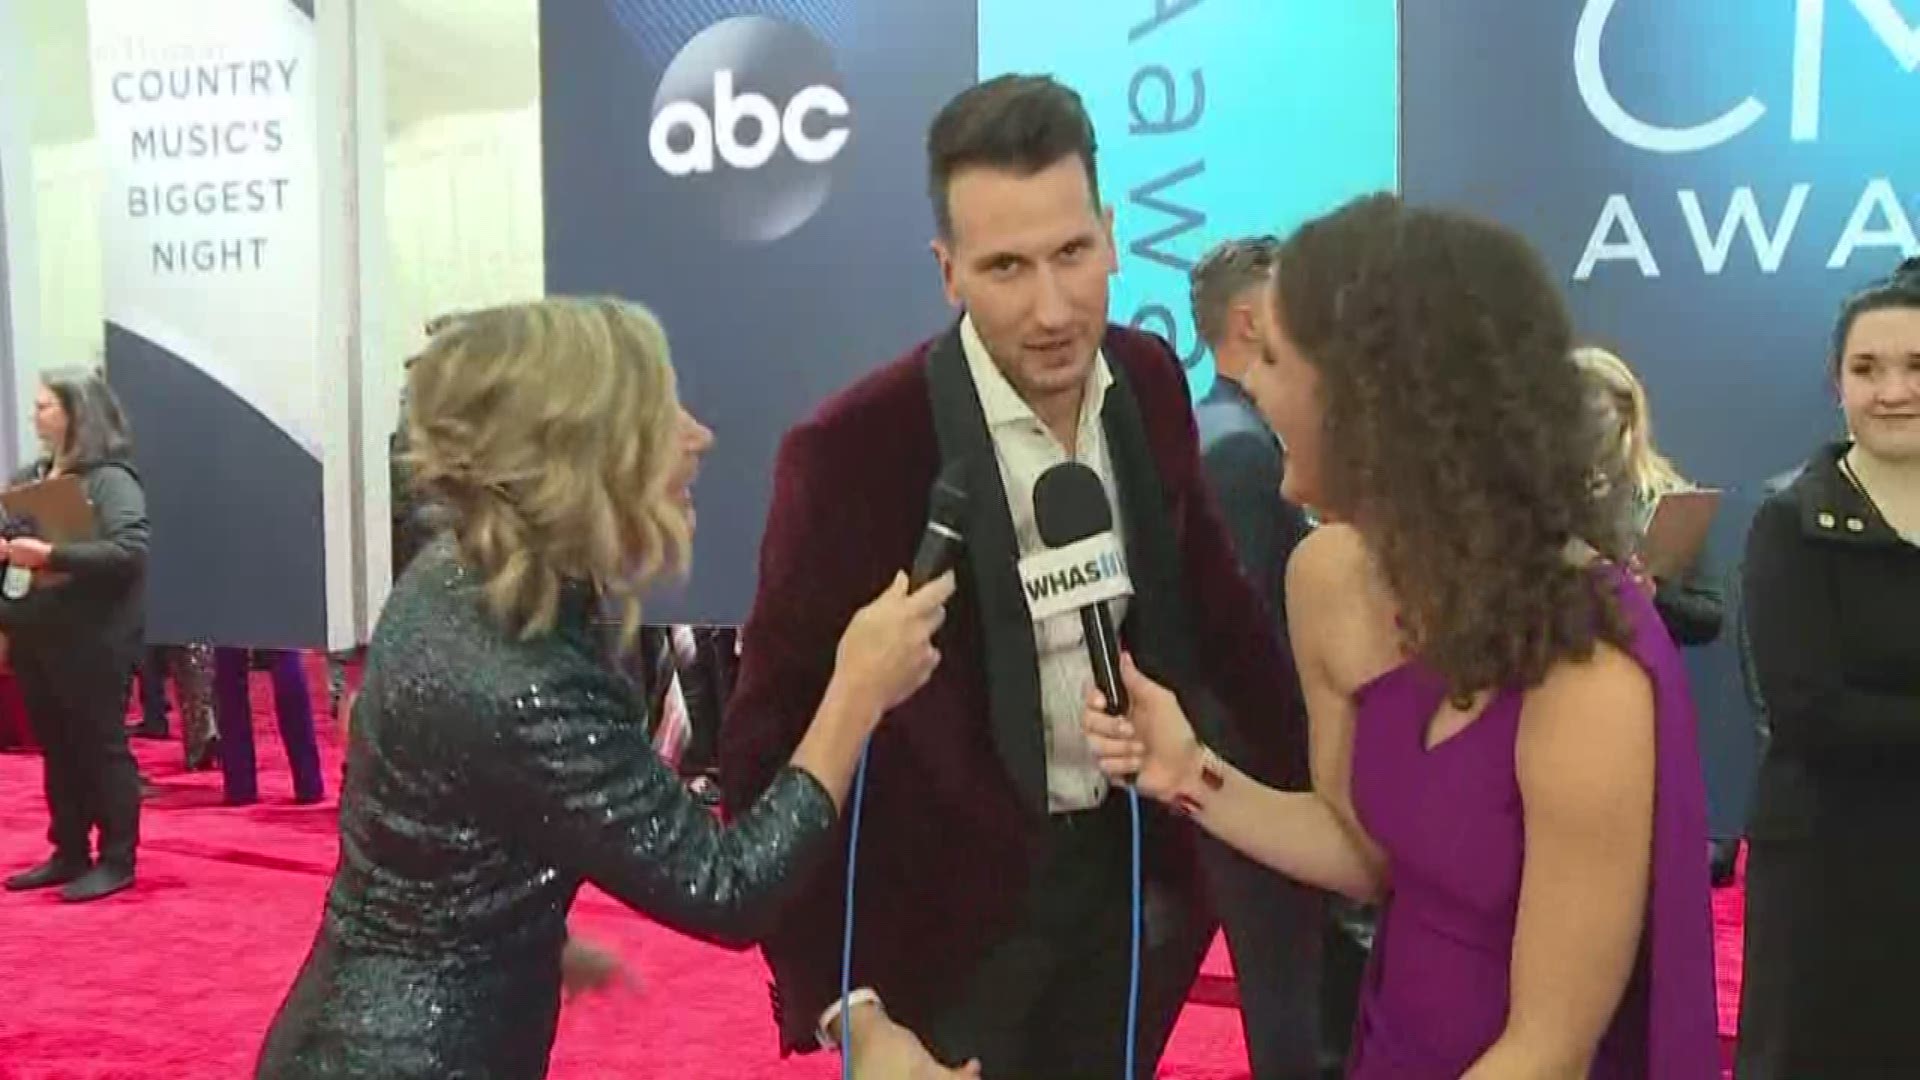 If you missed the CMA's red carpet or just want to relive the fun, we've got a recap for you.